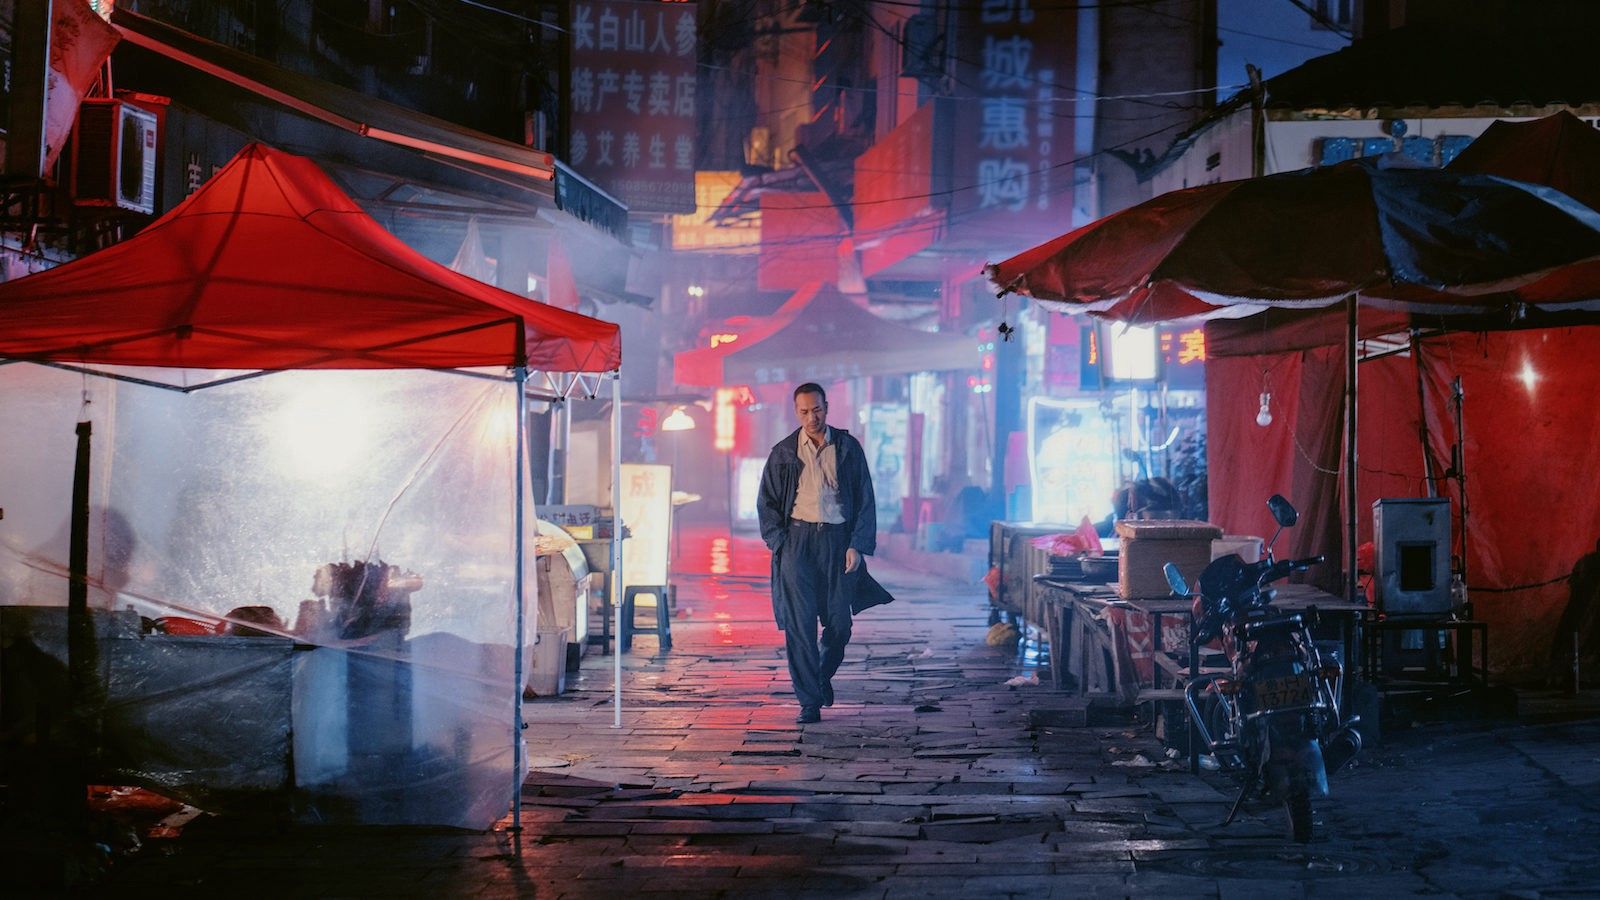 An image from the film Long Day's Journey Into Night